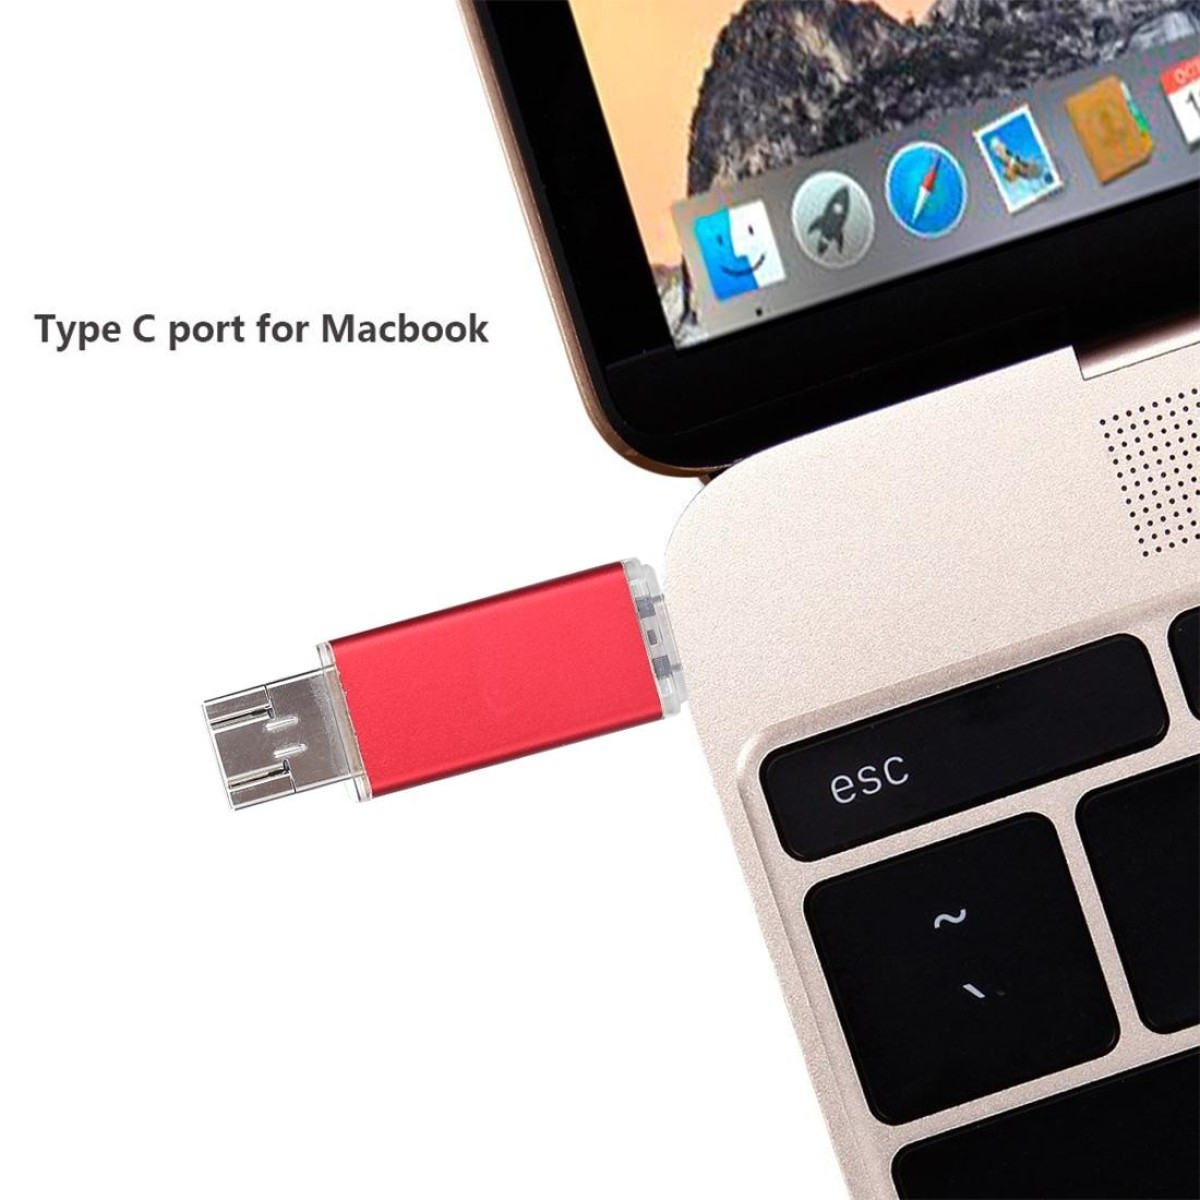 32GB 3 in 1 USB-C / Type-C + USB 2.0 + OTG Flash Disk, For Type-C Smartphones & PC Computer (Red)